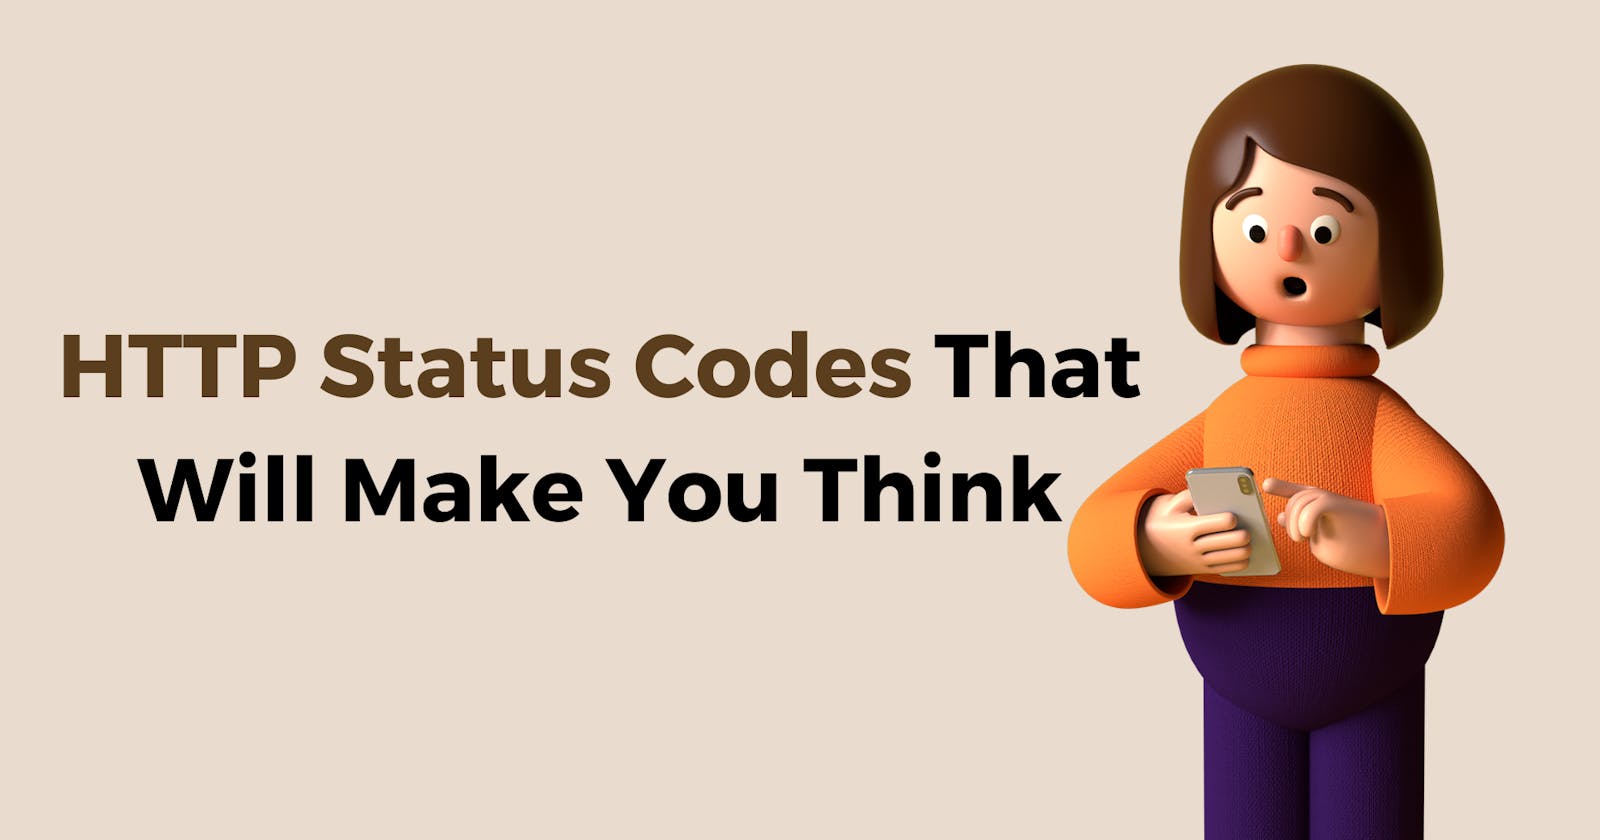 HTTP Status Codes That Will Make You Think